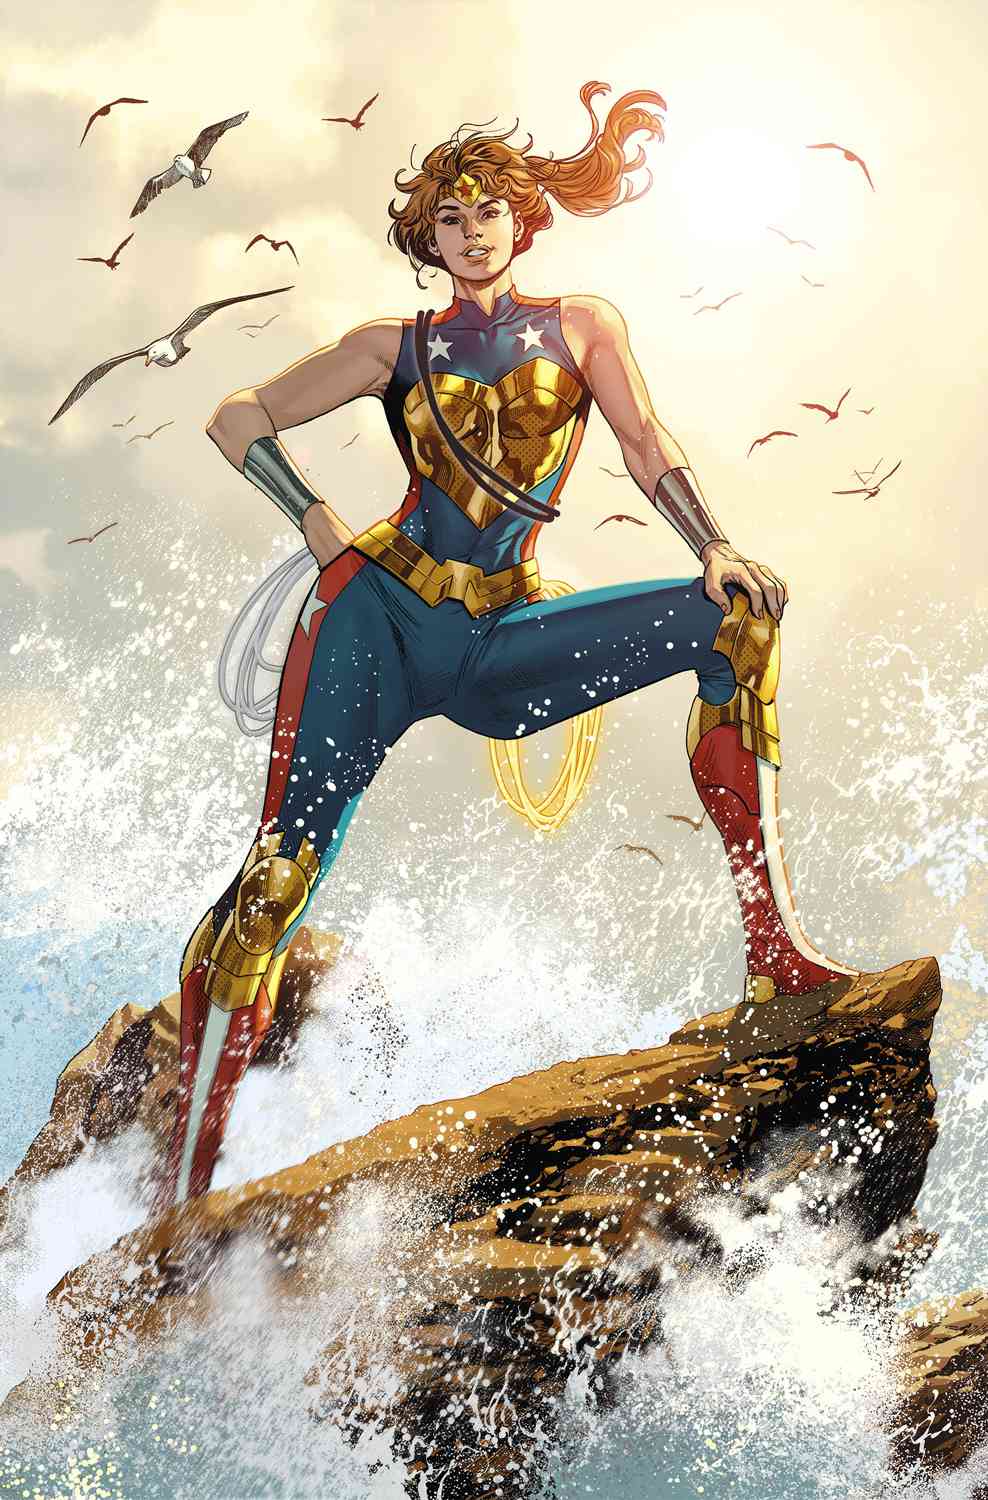 DC Comics is giving Wonder Woman a daughter named Trinity